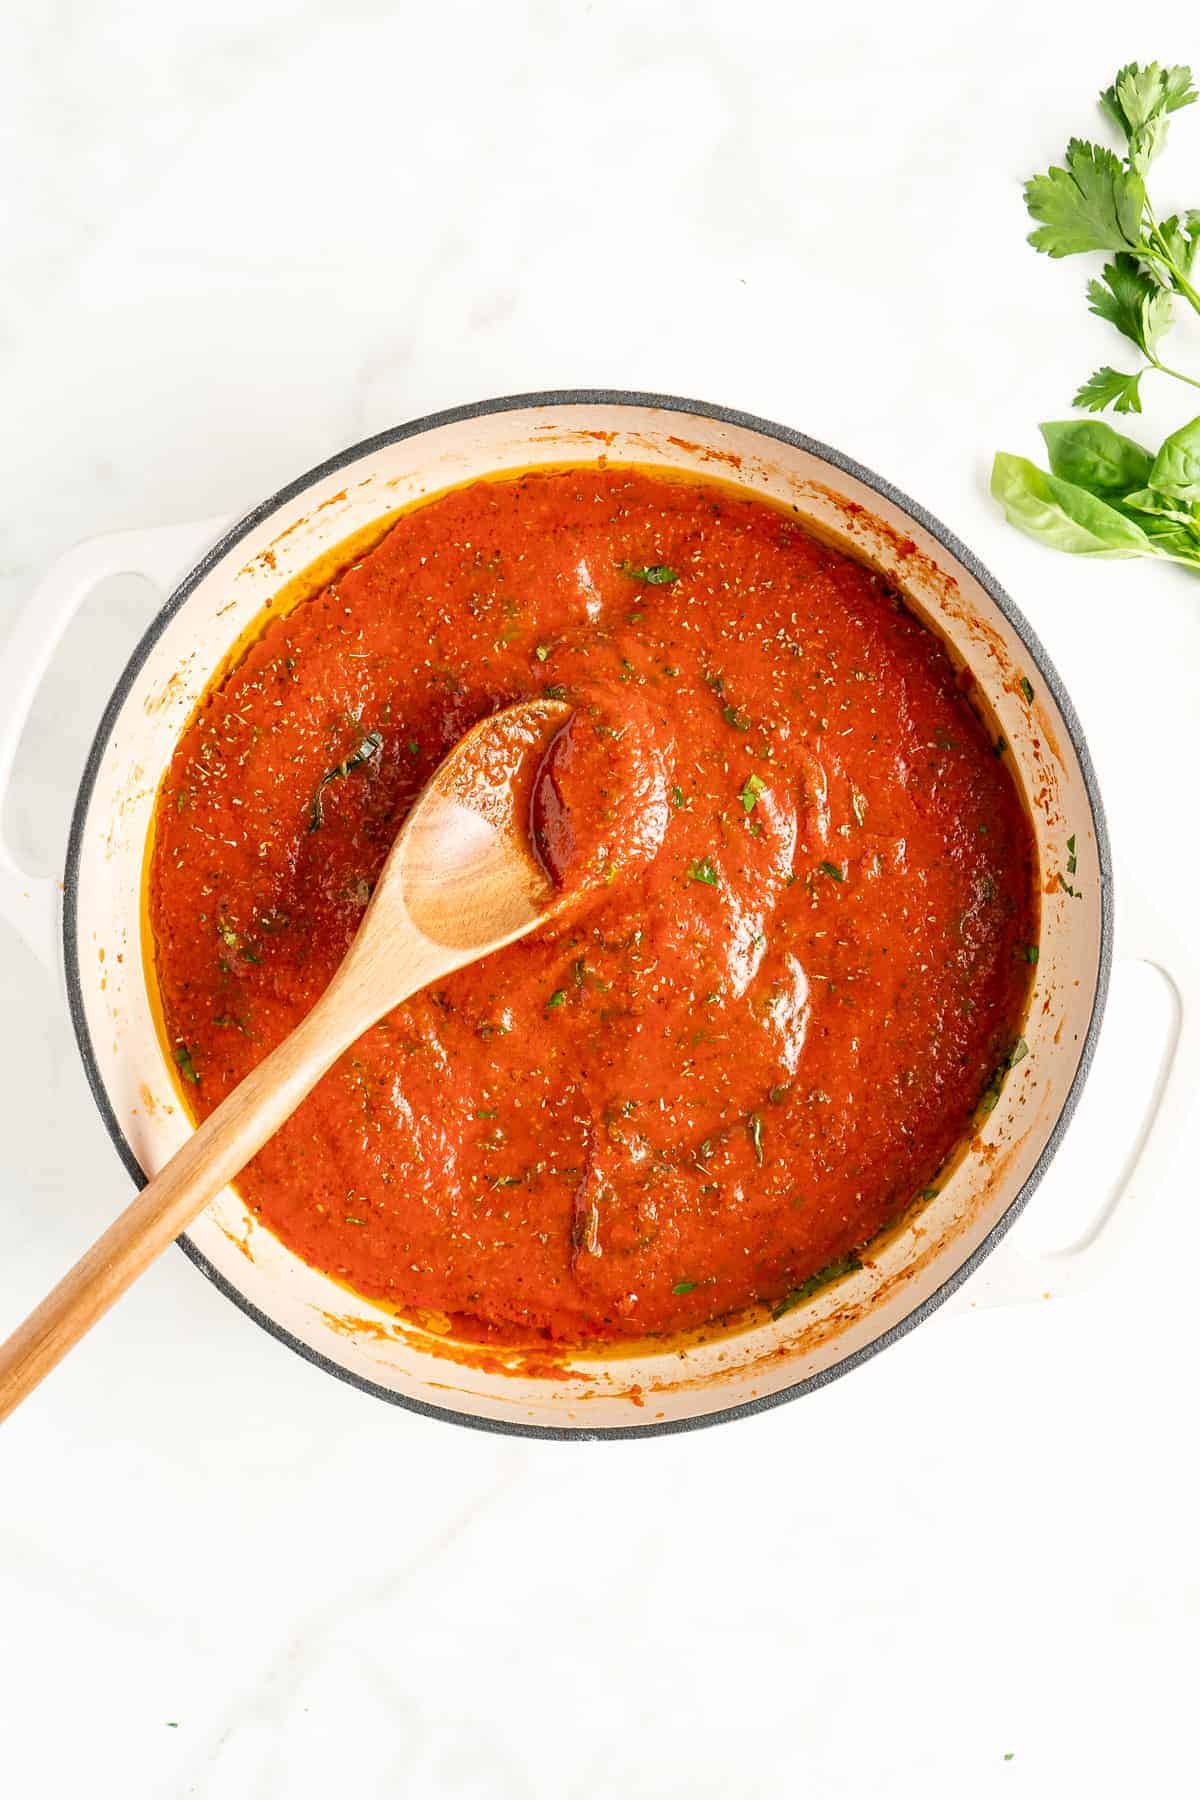 Overhead view of homemade marinara sauce in white pot with wooden spoon